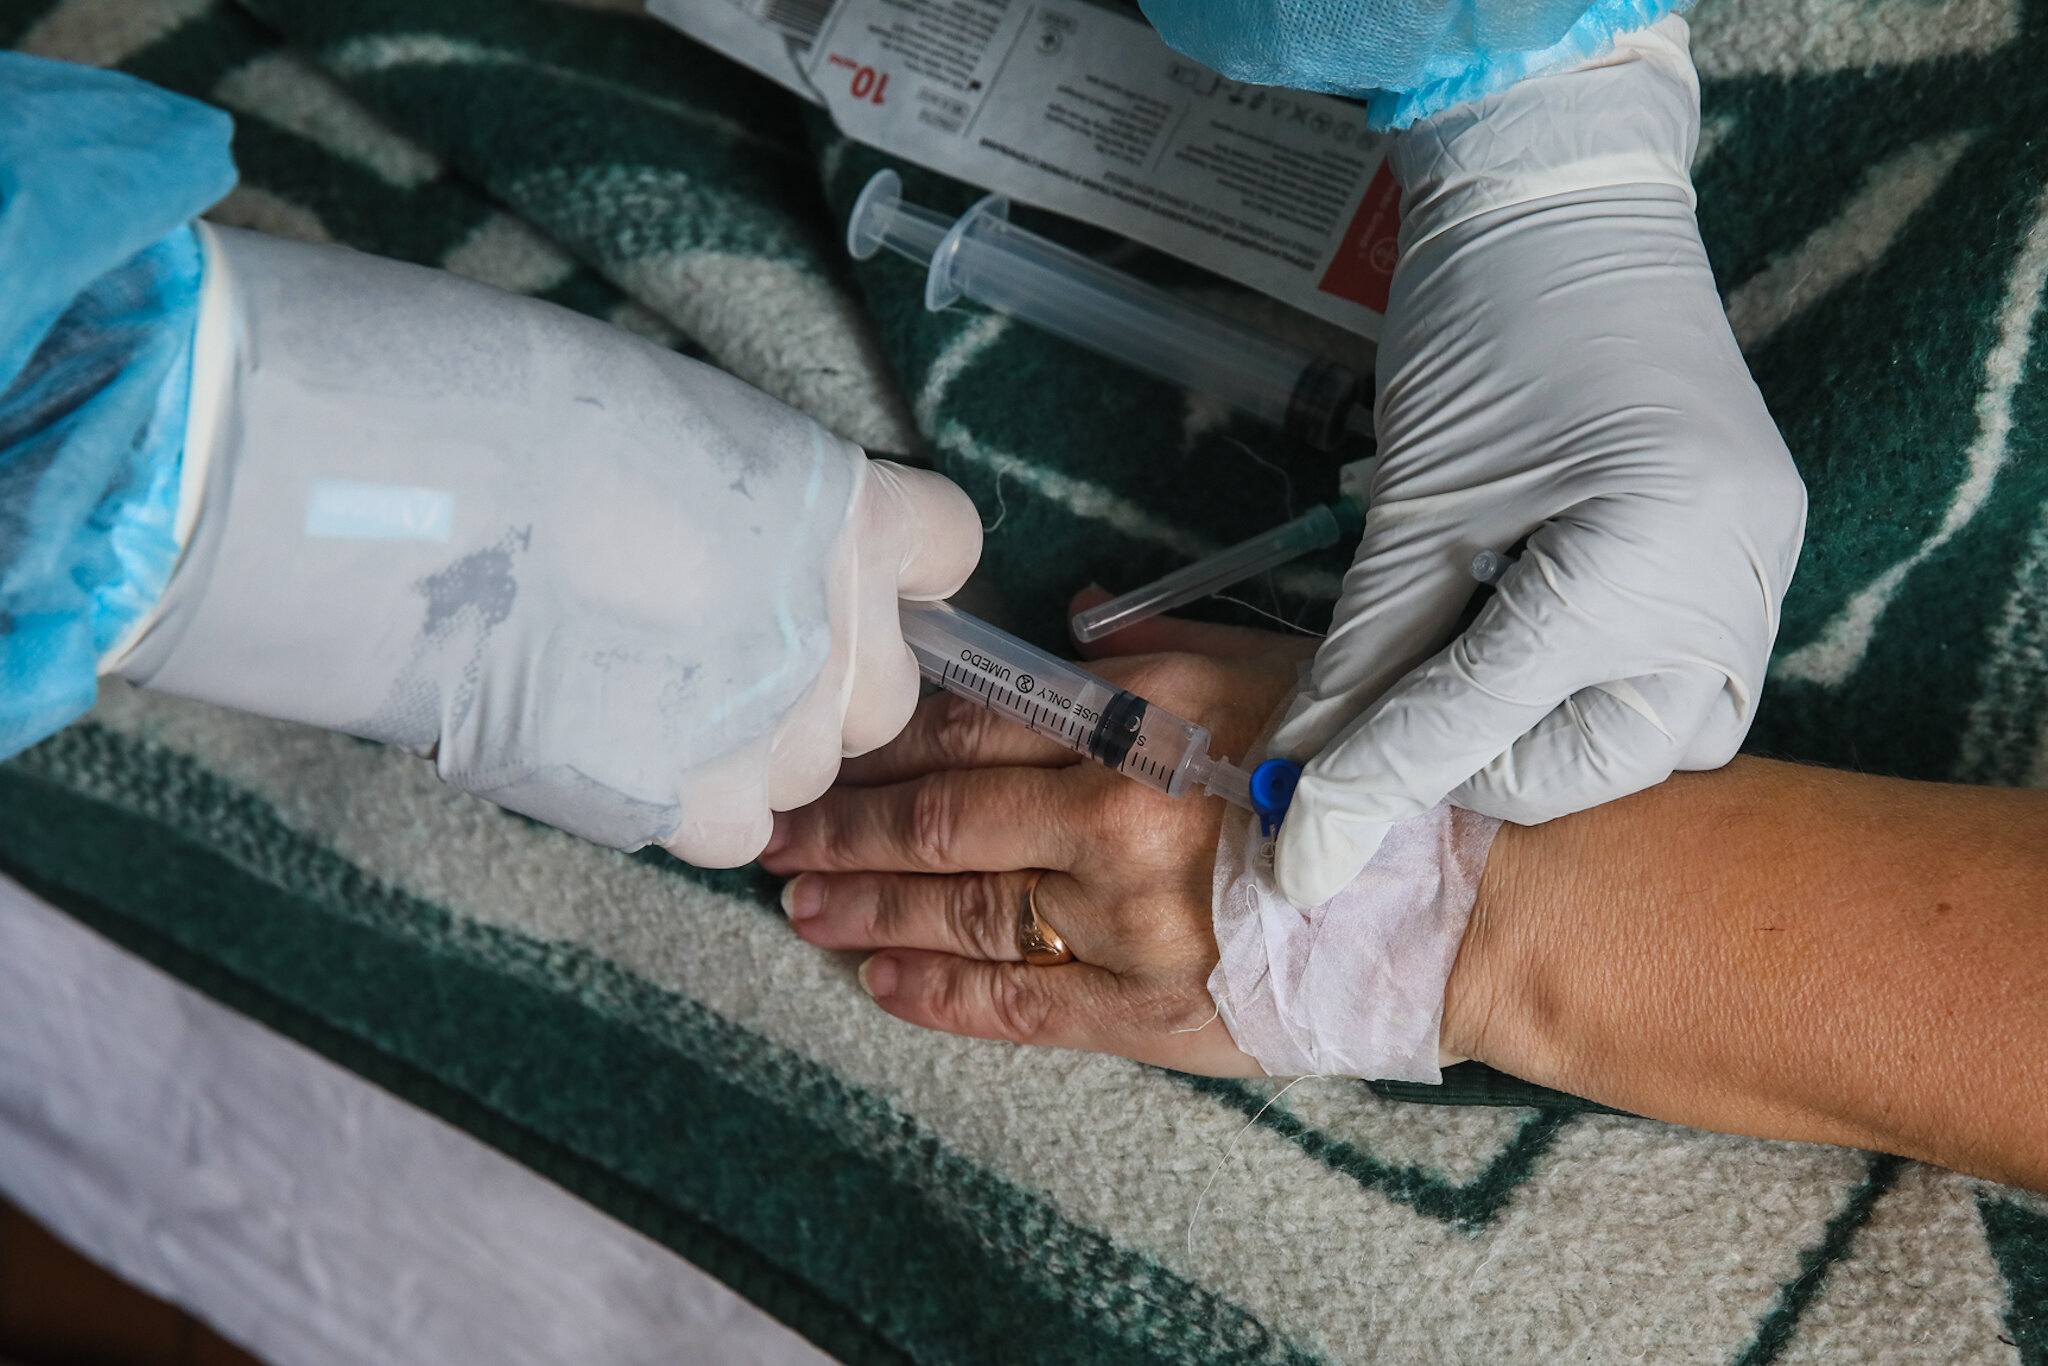 A medical worker is making an injection at Kolomyia District Hospital in Ivano-Frankivsk Oblast on March 16, 2021.